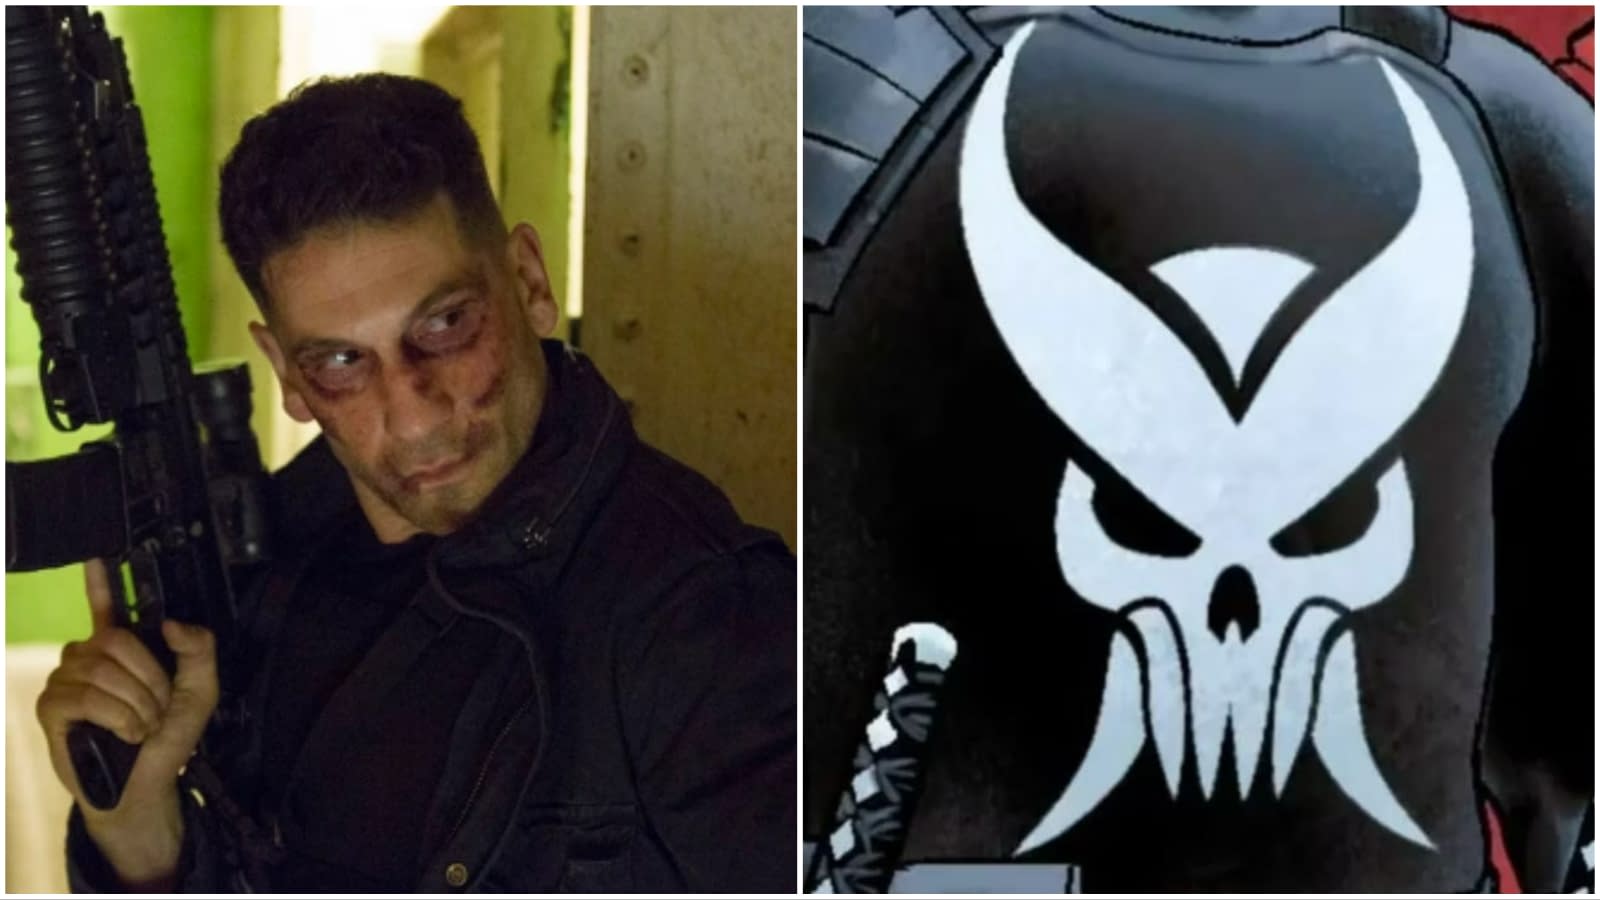 Marvel Officially Changes Punisher Logo in New Series